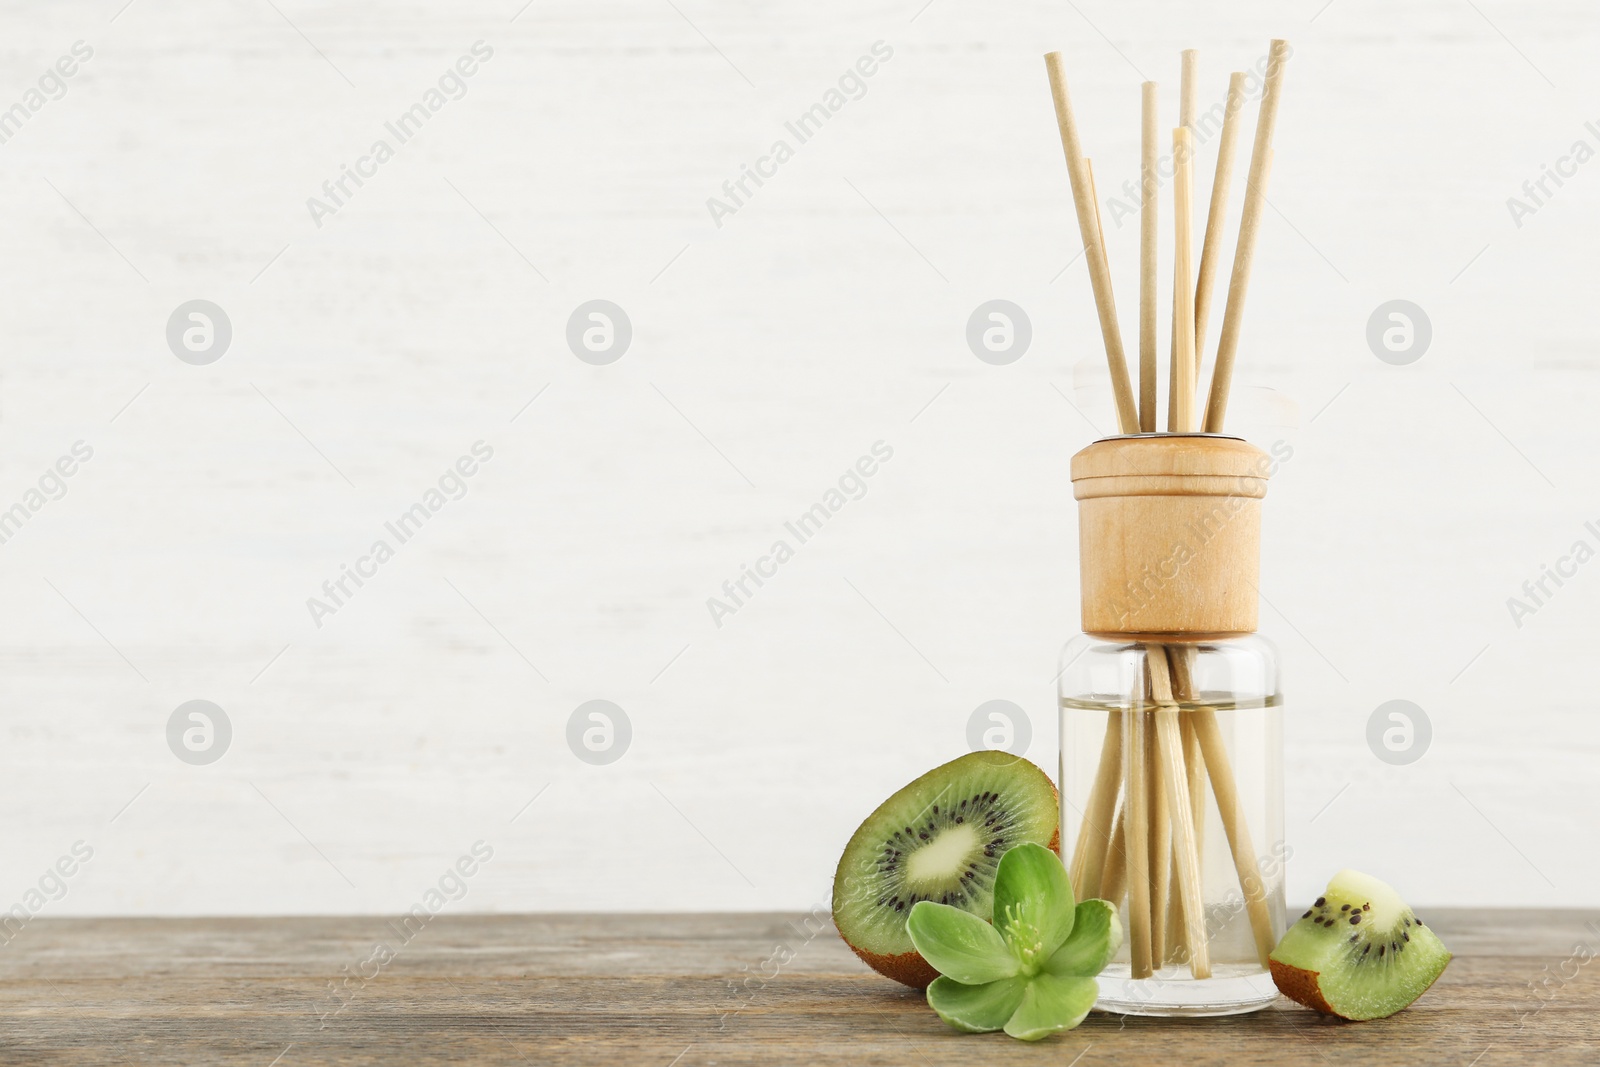 Photo of Aromatic reed freshener and kiwi on wooden table against light background. Space for text